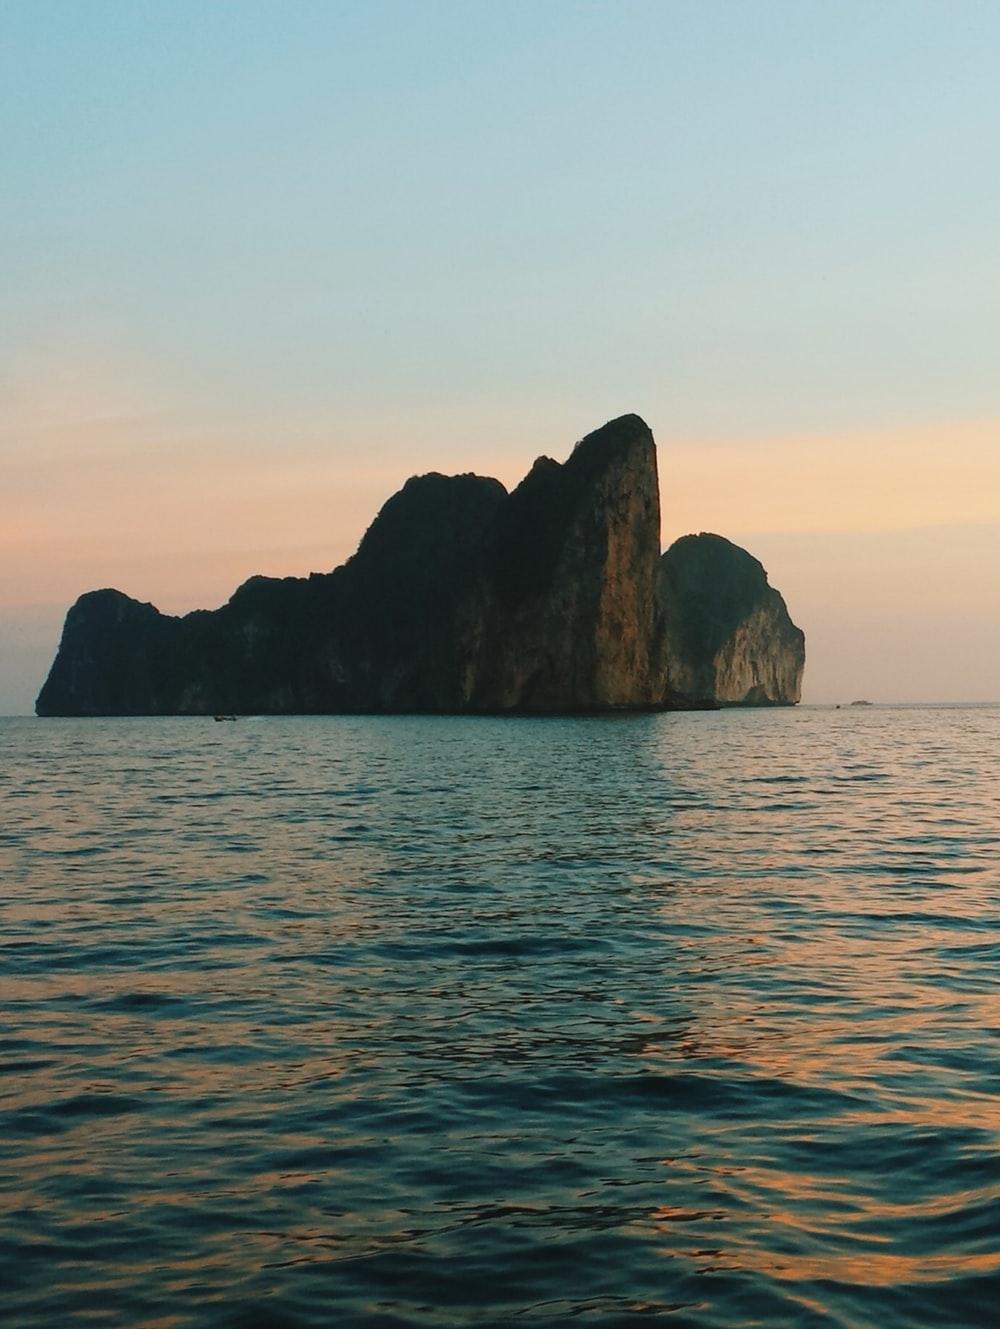 Phi Phi Islands, Thailand Picture. Download Free Image